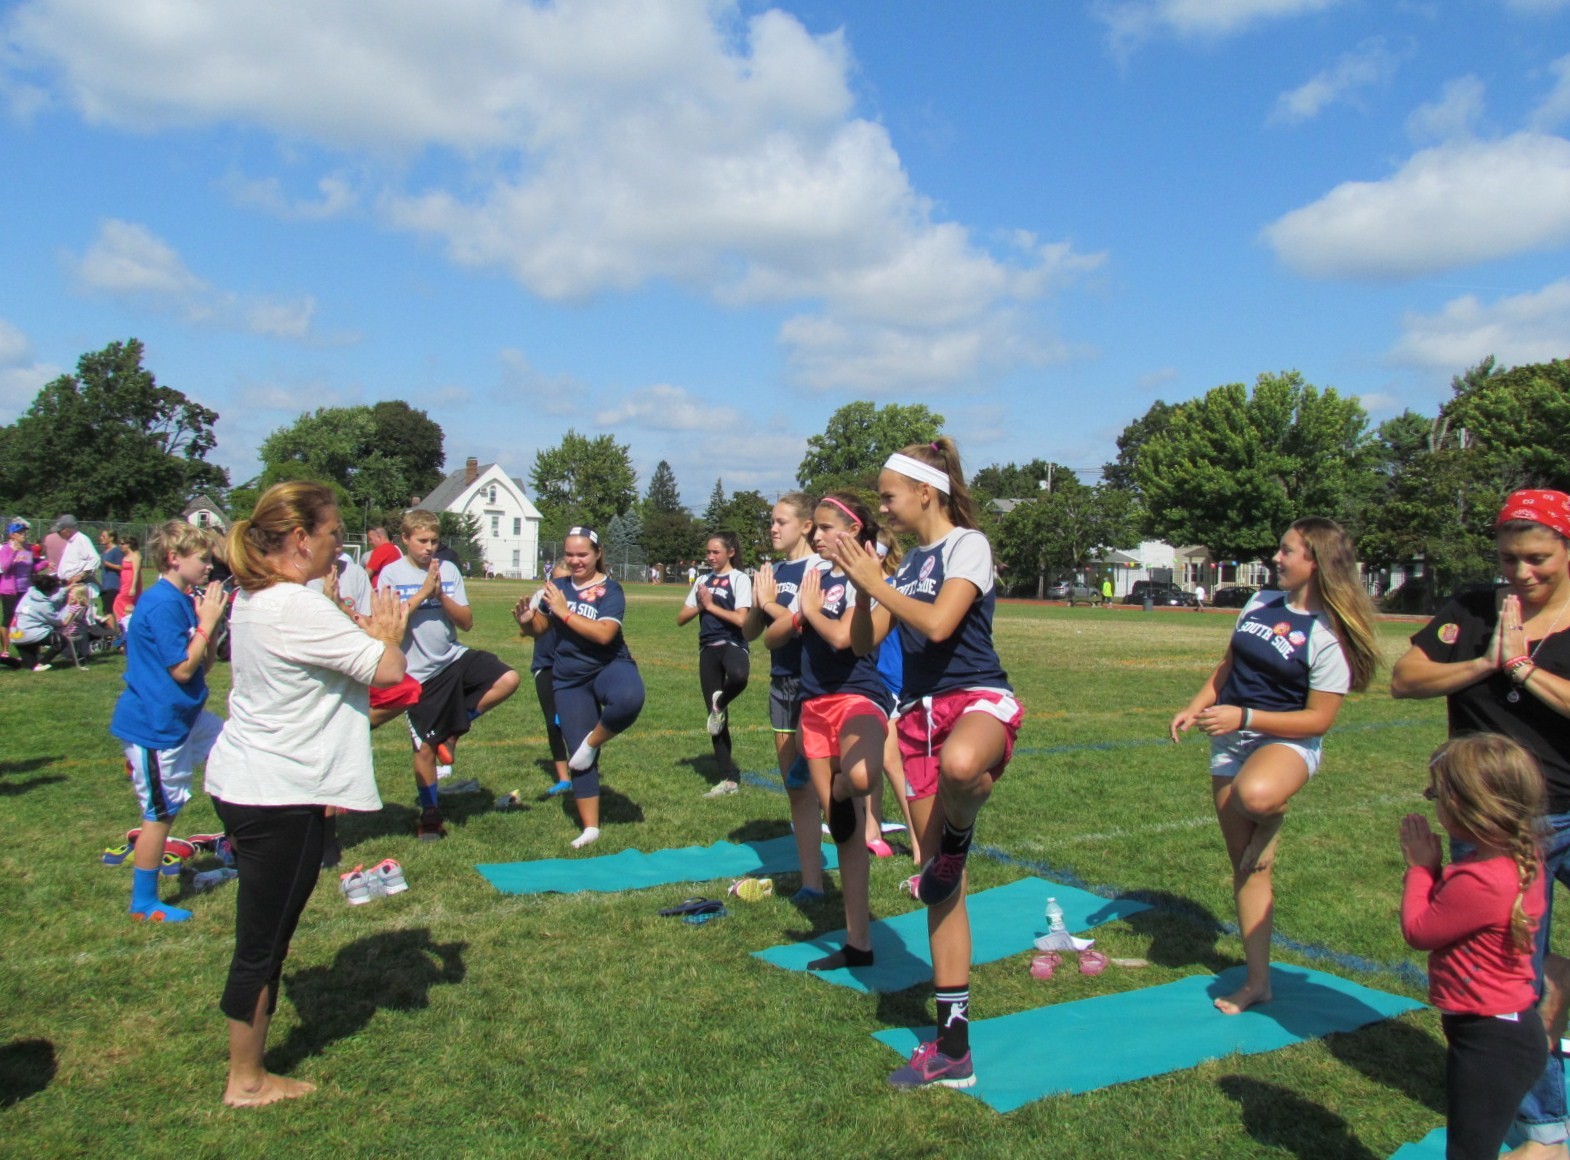 People practiced yoga on the field after the walk.